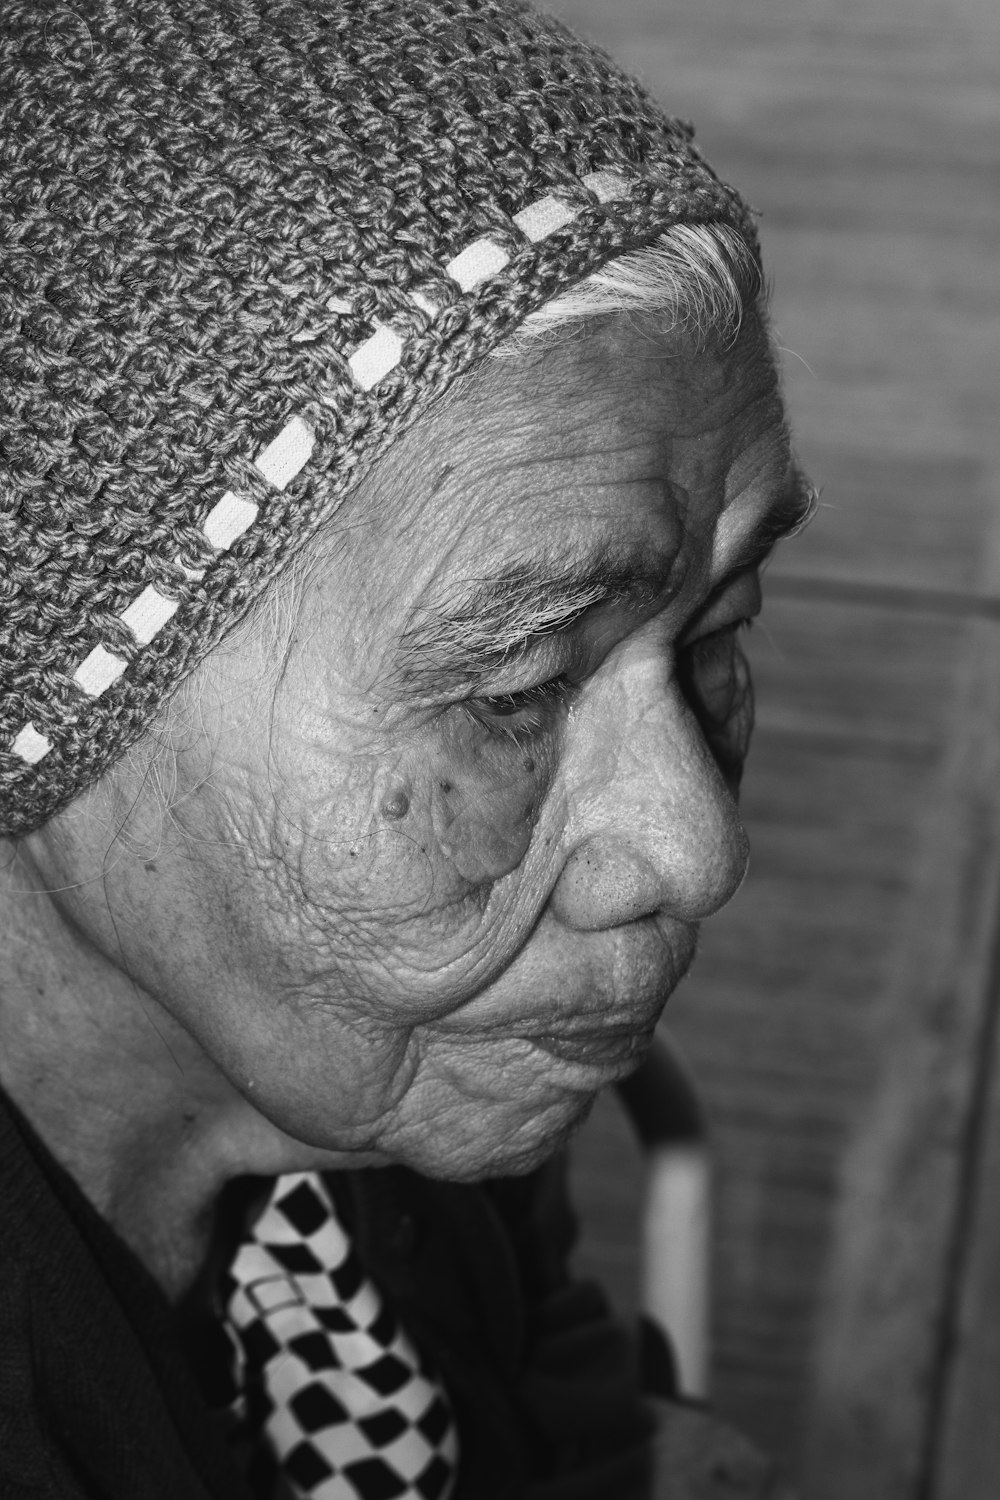 an old woman wearing a knitted hat and a tie